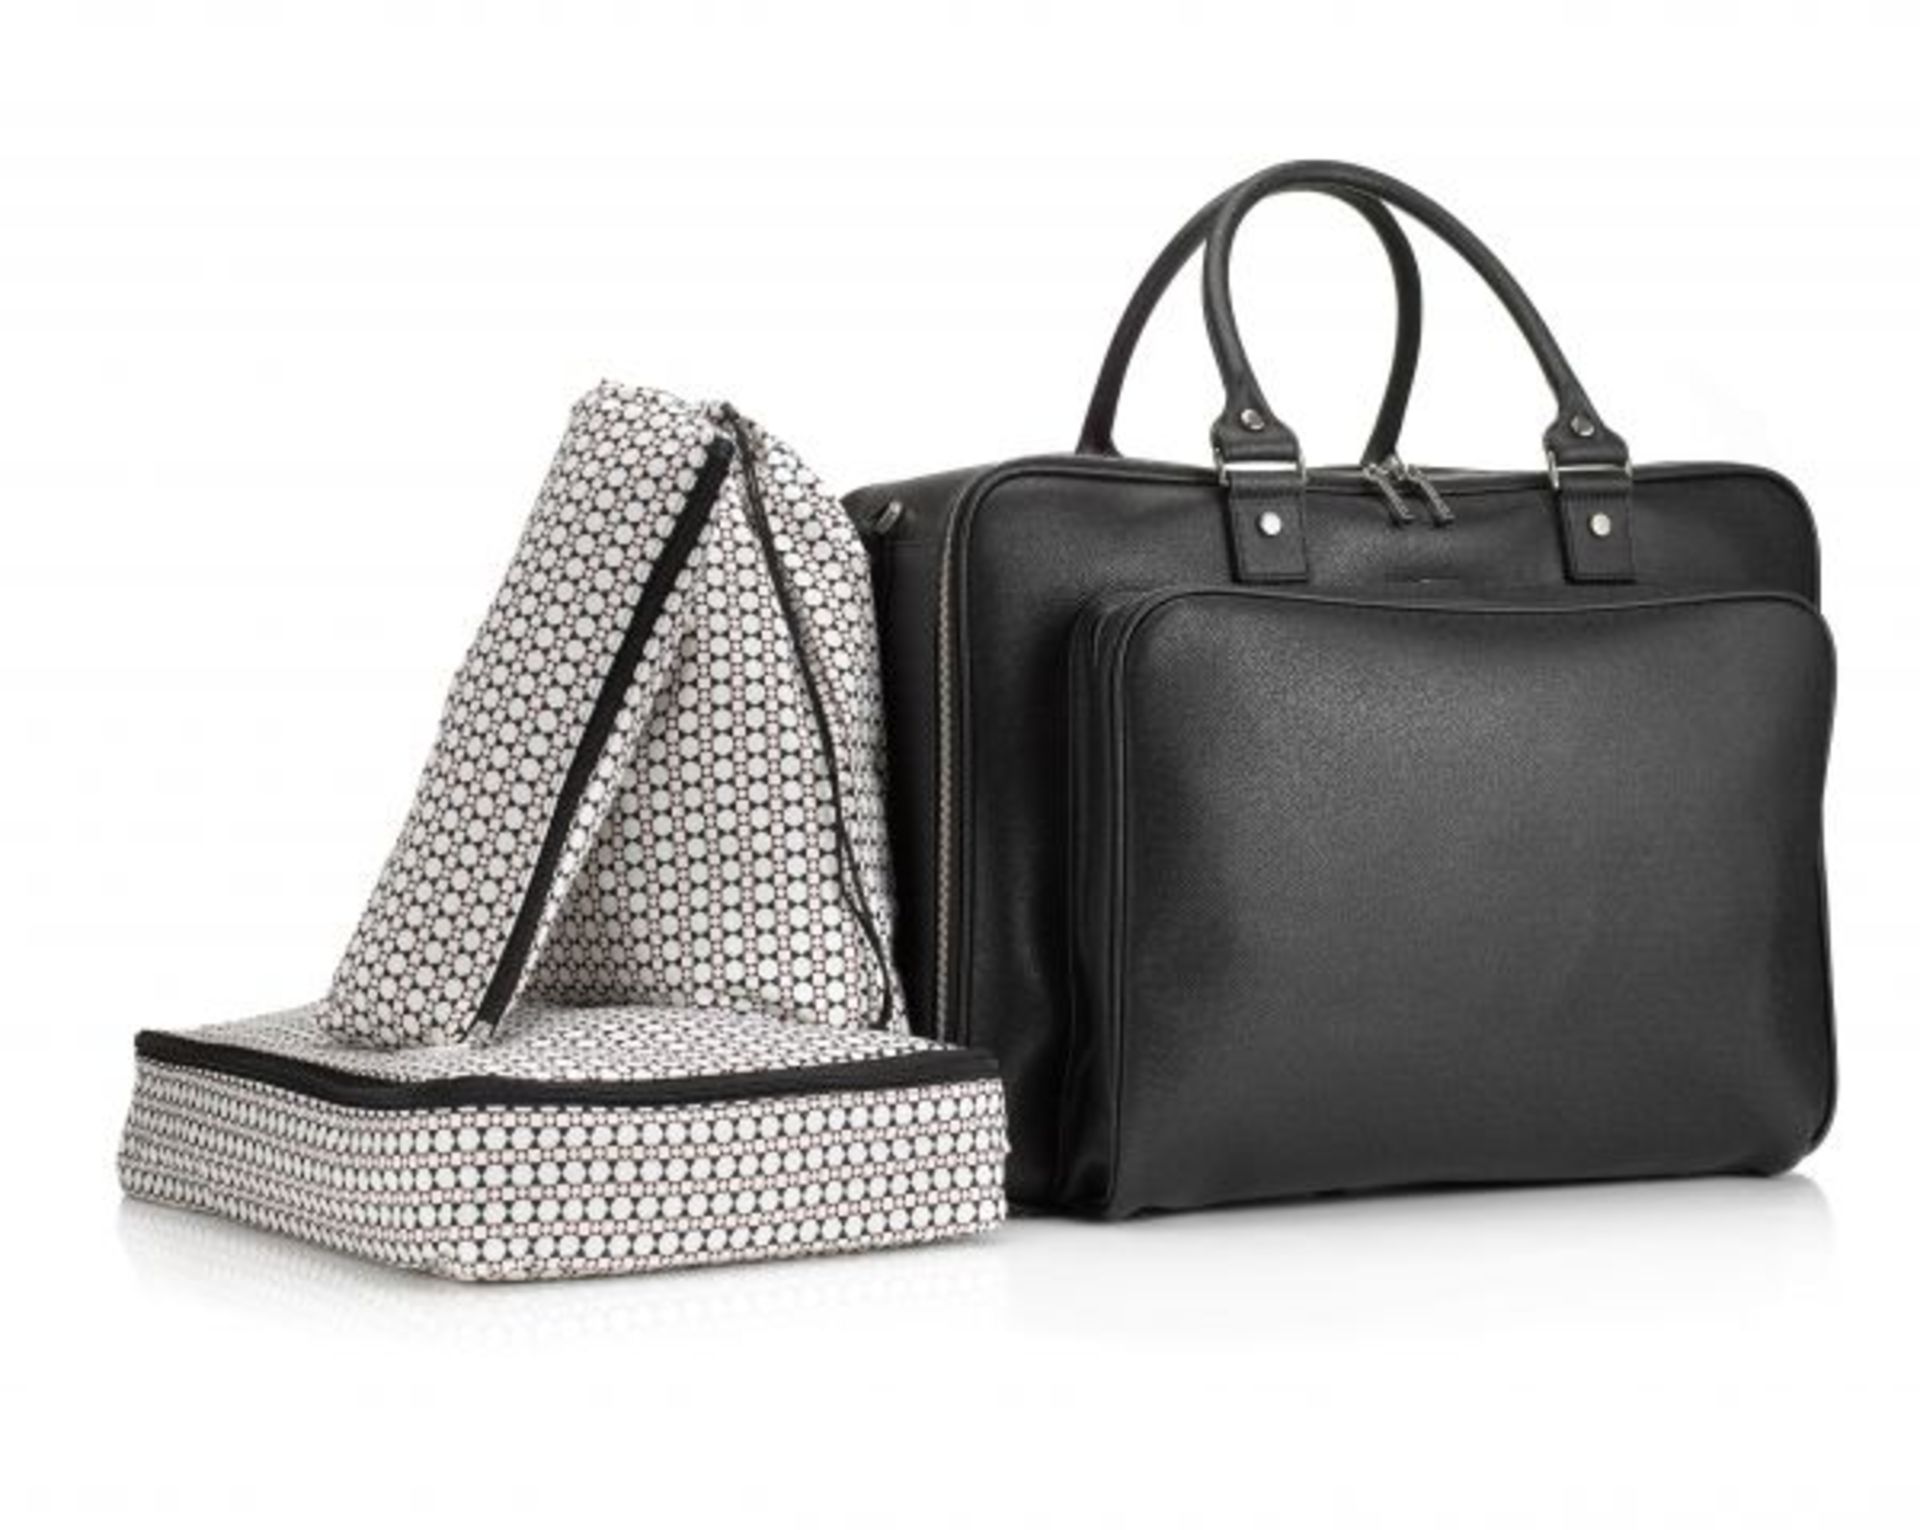 JET SET MINI CABIN BAG IN LEATHER MOSAICS CELEBRATION RRP £950.00 This lightweight, travel or